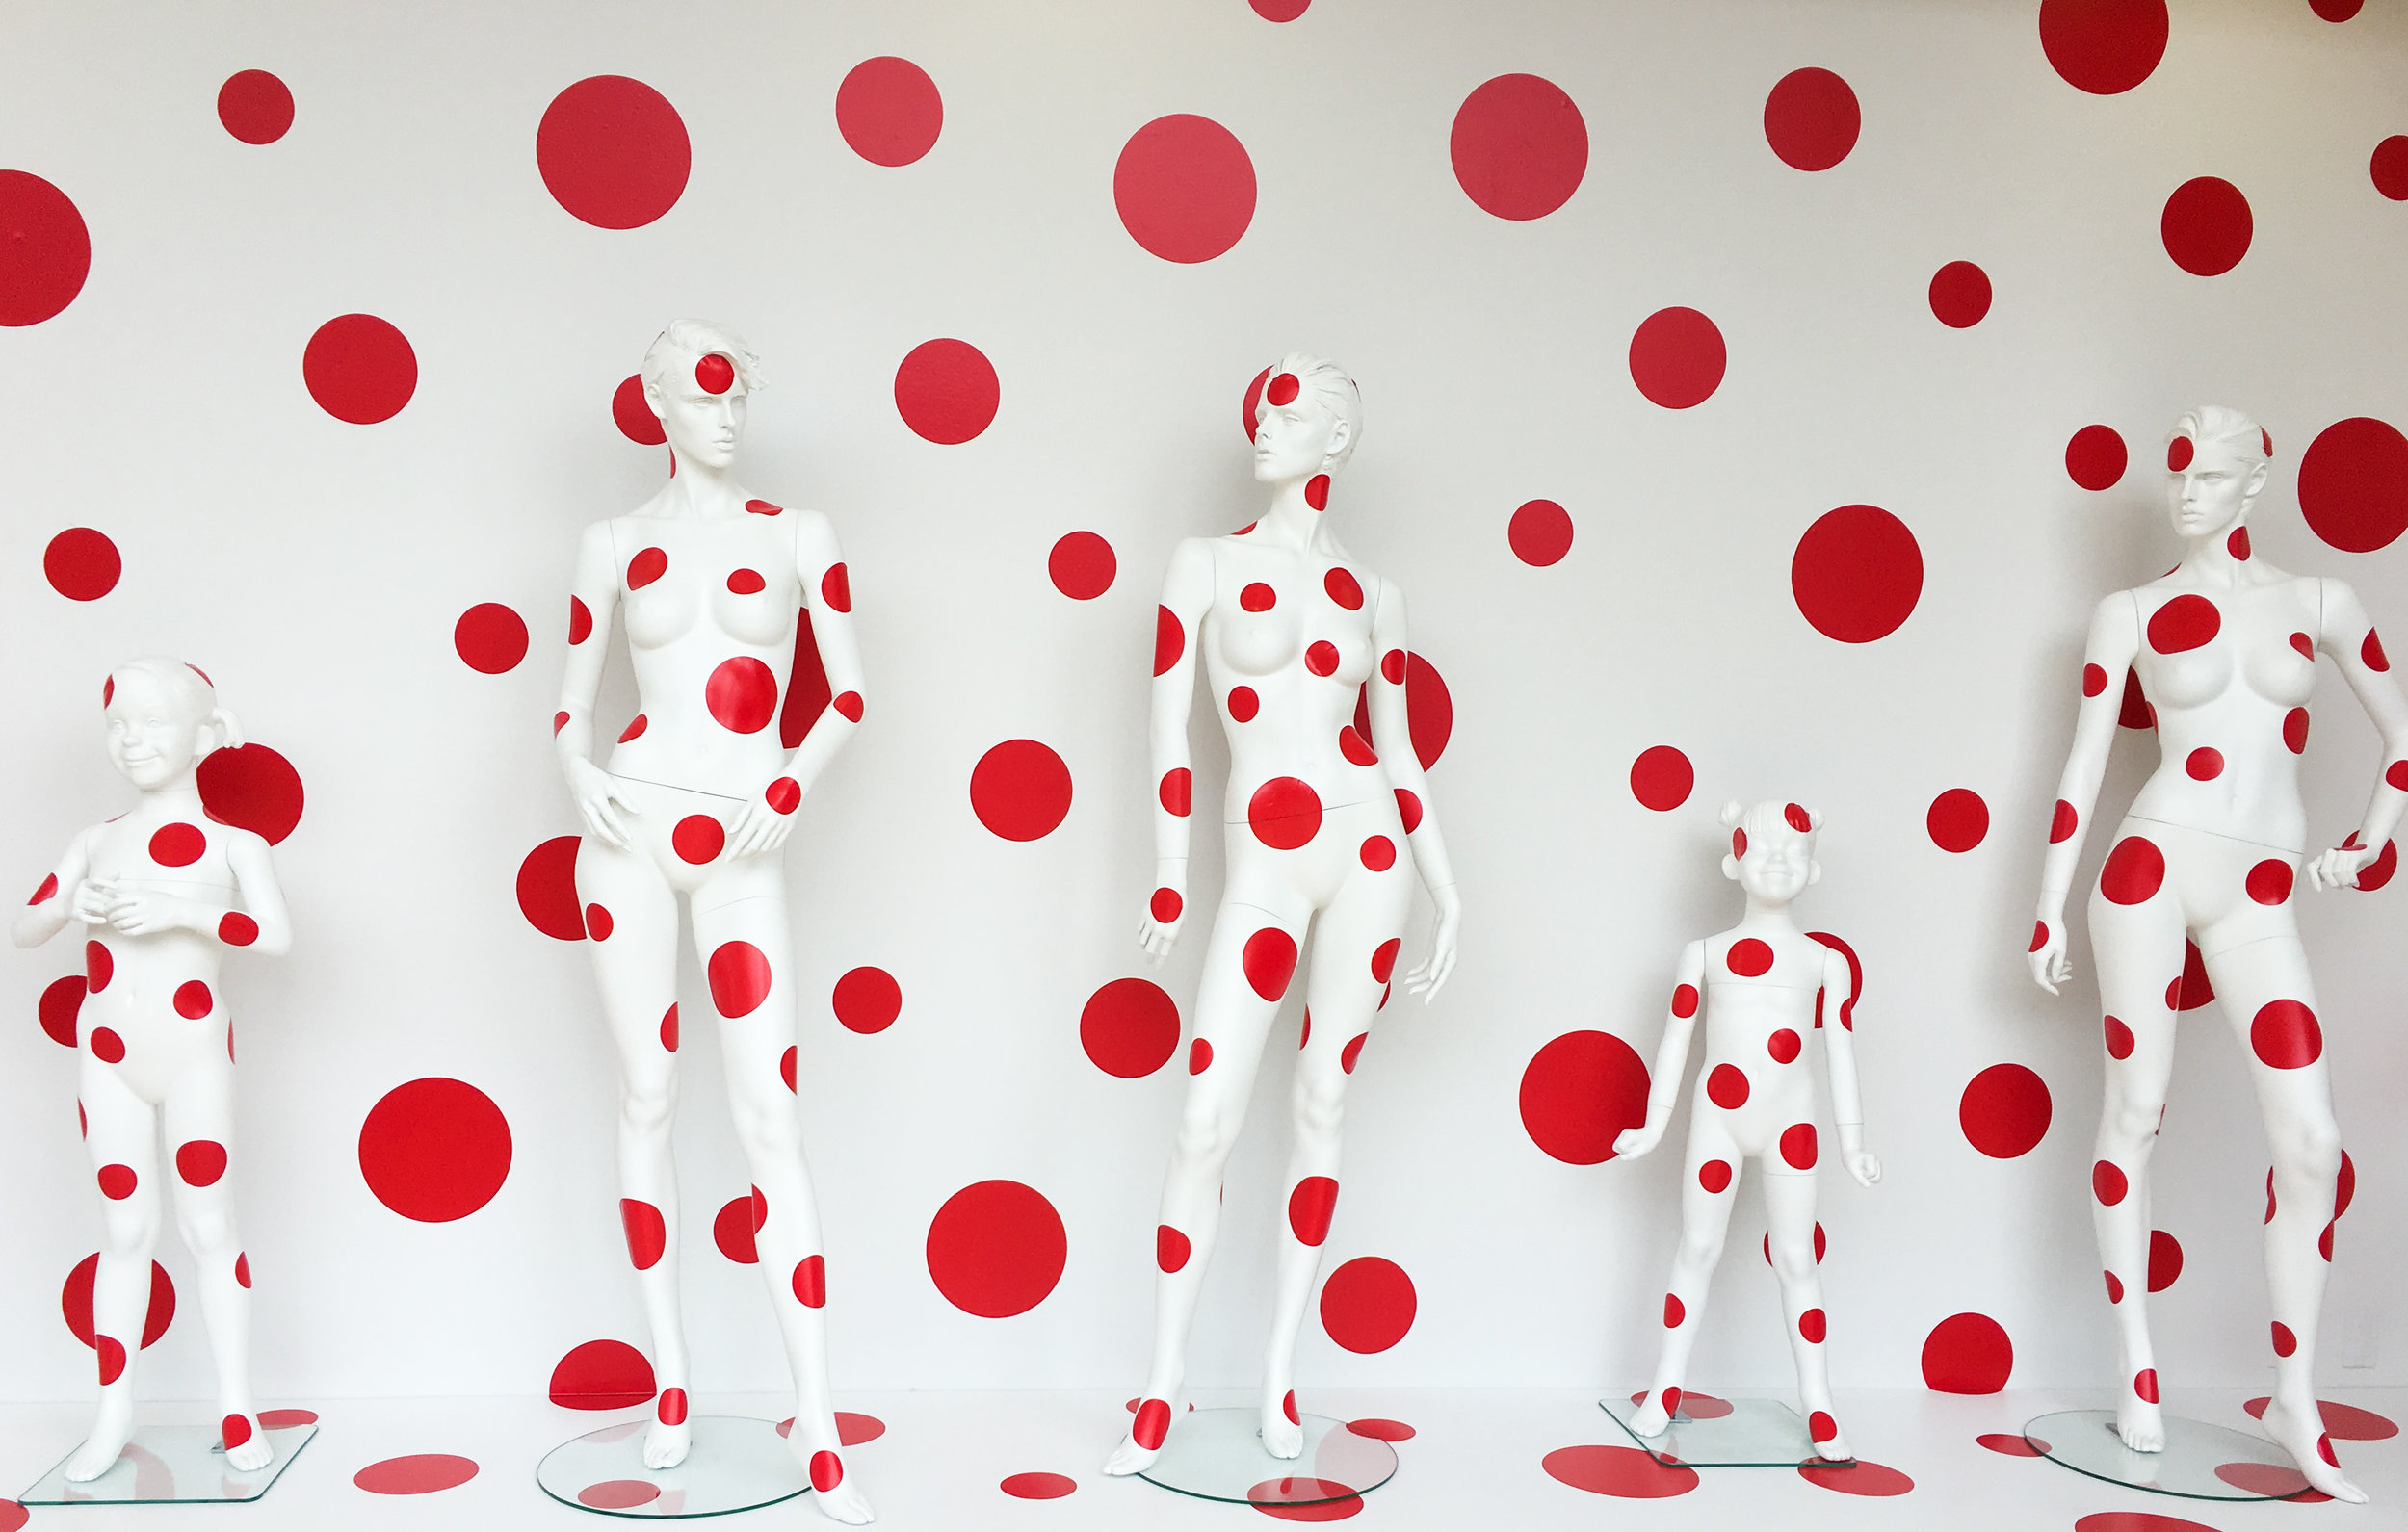 mannequins covered in polka-dots